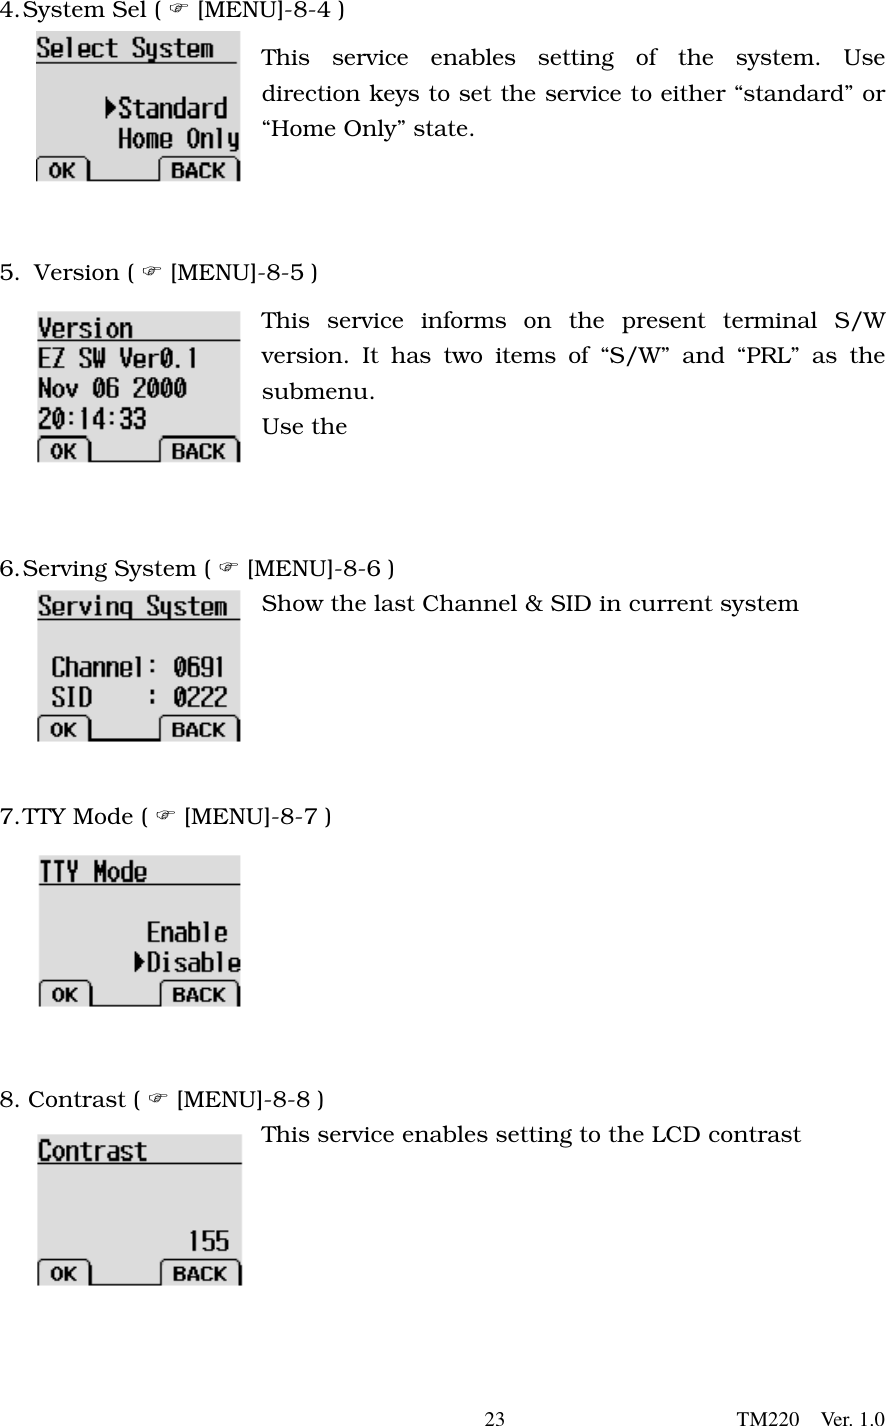       23                      TM220  Ver. 1.0 4. System Sel (  [MENU]-8-4 ) This service enables setting of the system. Use direction keys to set the service to either “standard” or “Home Only” state.   5.   Version  (   [MENU]-8-5 ) This service informs on the present terminal S/W version. It has two items of “S/W” and “PRL” as the submenu.  Use the      6. Serving System (  [MENU]-8-6 ) Show the last Channel &amp; SID in current system      7. TTY Mode (  [MENU]-8-7 )        8. Contrast (  [MENU]-8-8 ) This service enables setting to the LCD contrast      